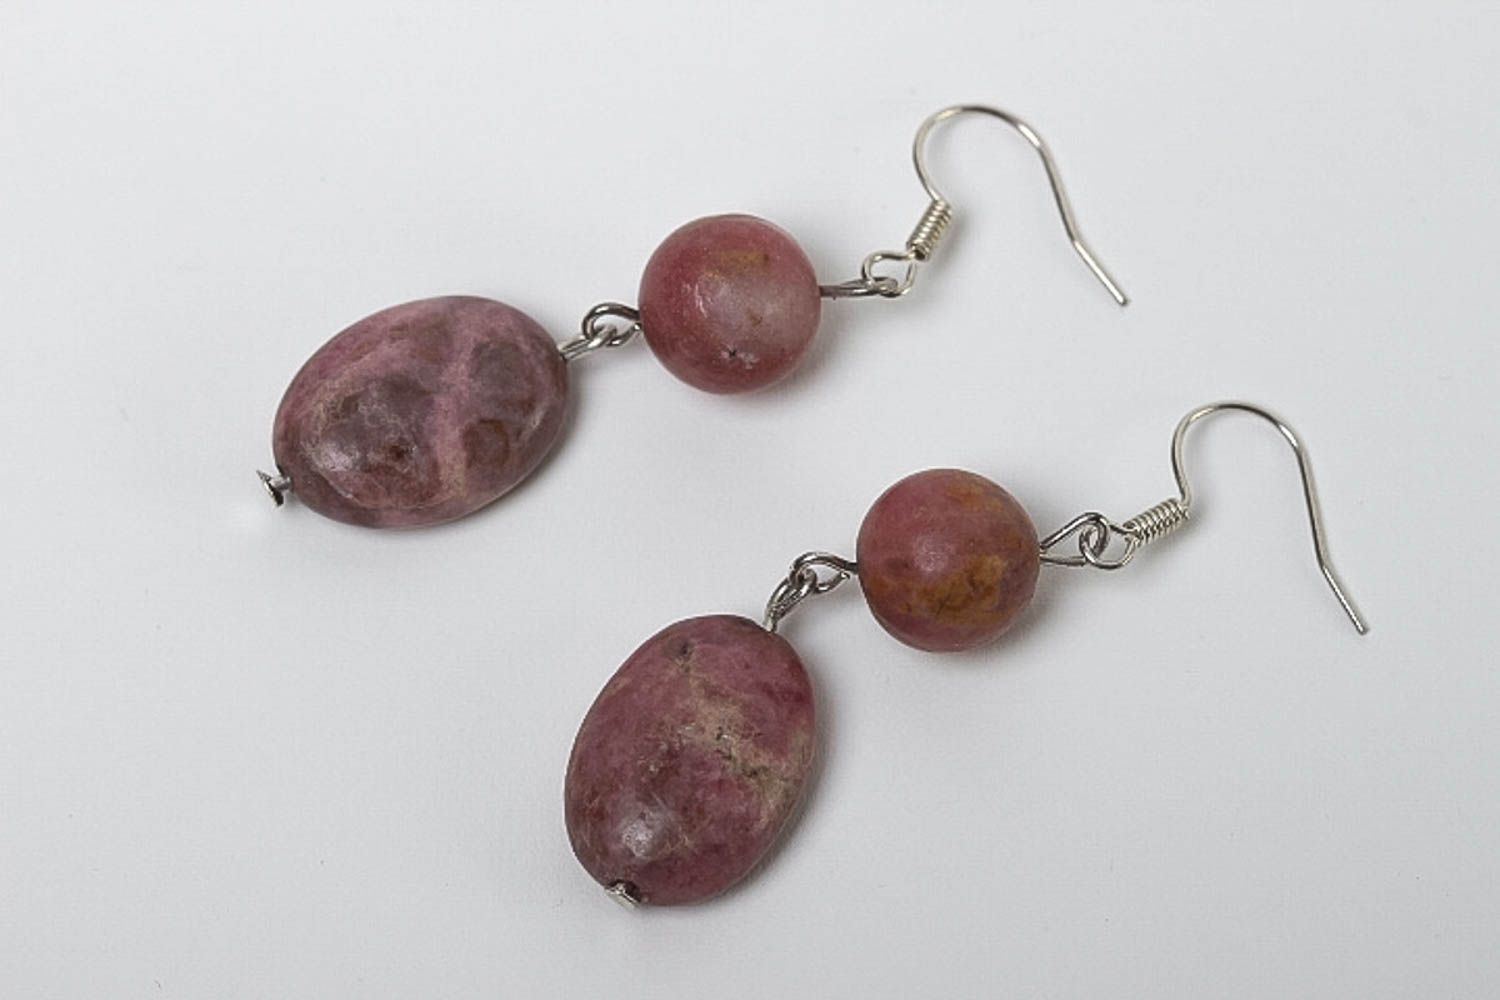 Handmade rhodonite earrings jewelry with natural stones stylish accessories photo 2